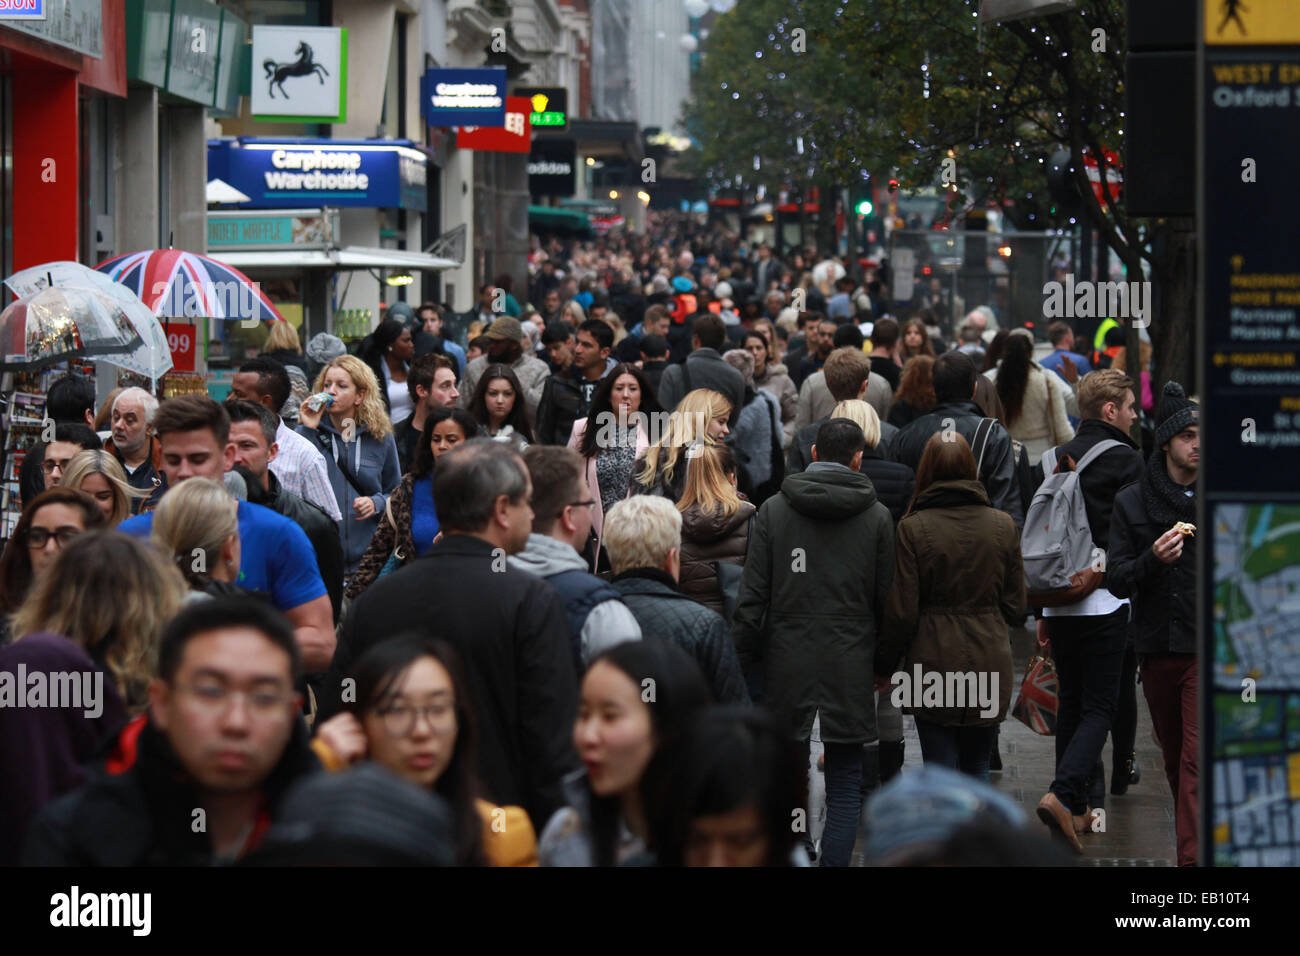 London, UK. 22nd November, 2014. Oxford Street in London is very busy with shoppers as shops are hoping for lots of sales in the run-up to Christmas which is just over one month away. Credit:  Paul Marriott/Alamy Live News Stock Photo